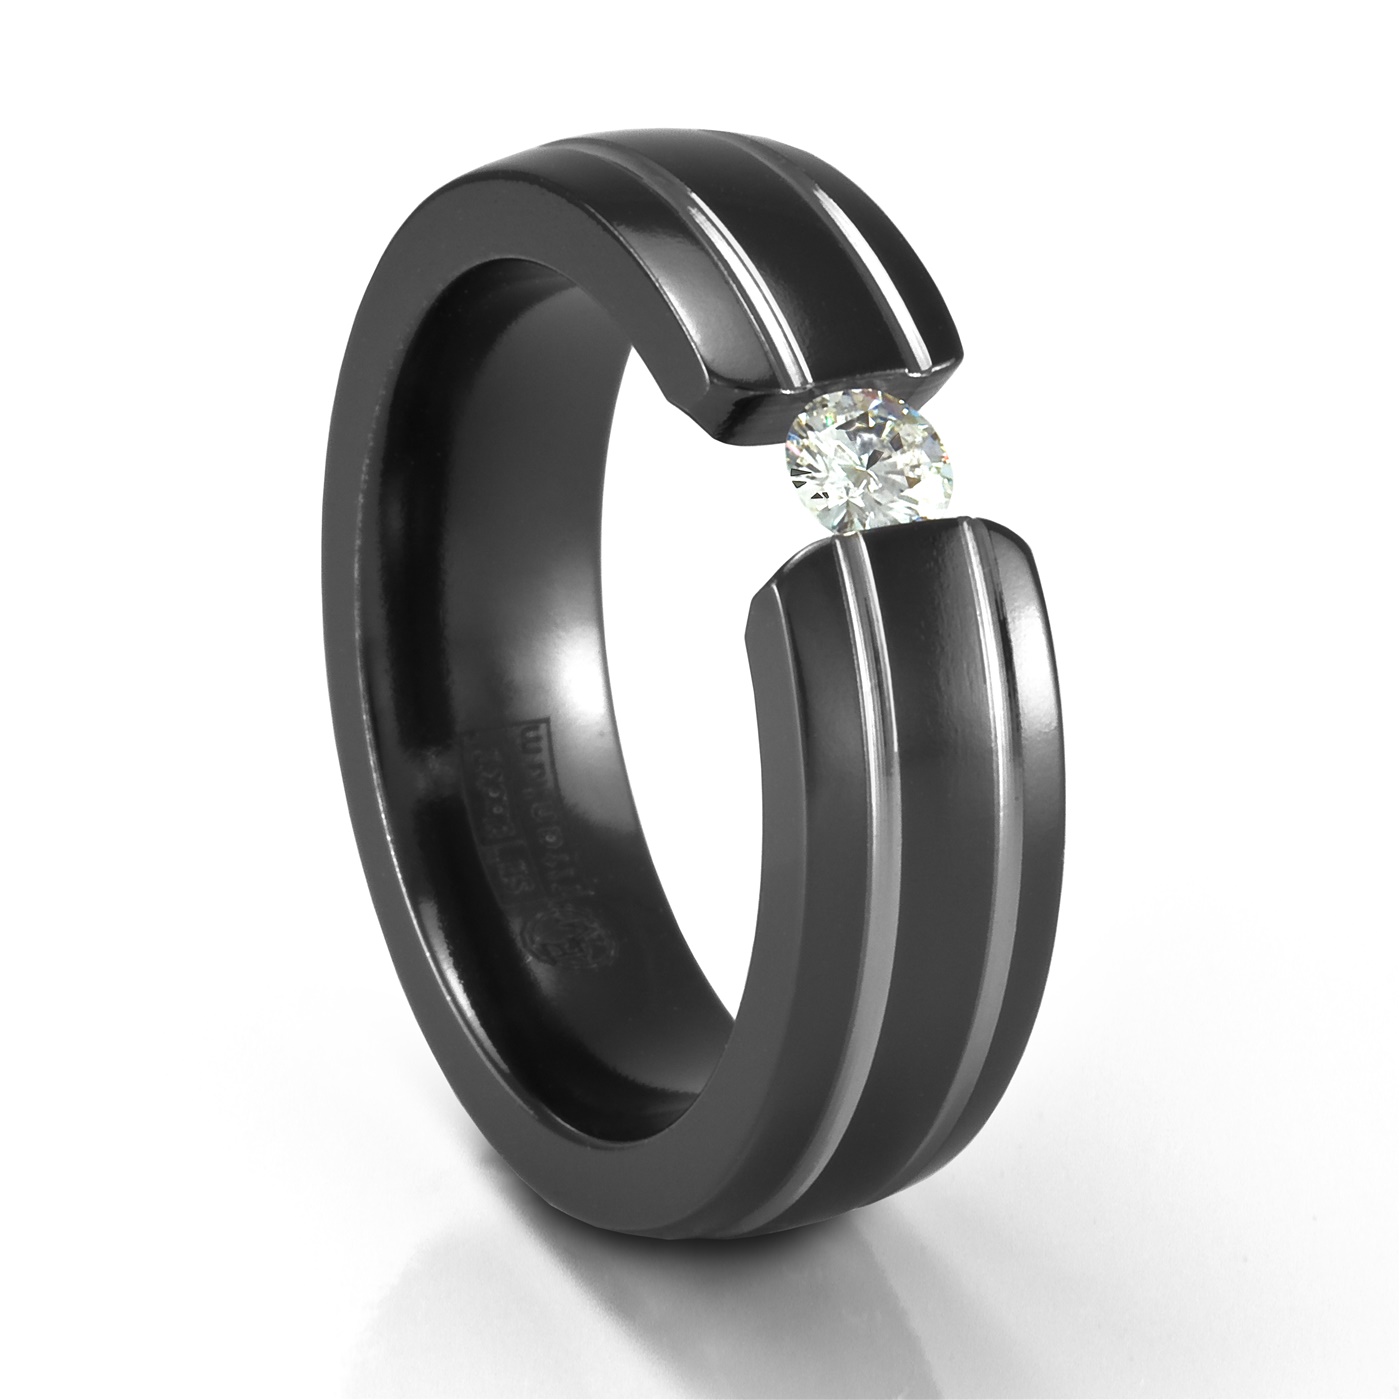 Bridal Wedding Bands Decorative Bands Edward Mirell Black Ti and Titanium Polished Grooved Concave Ring Size 9